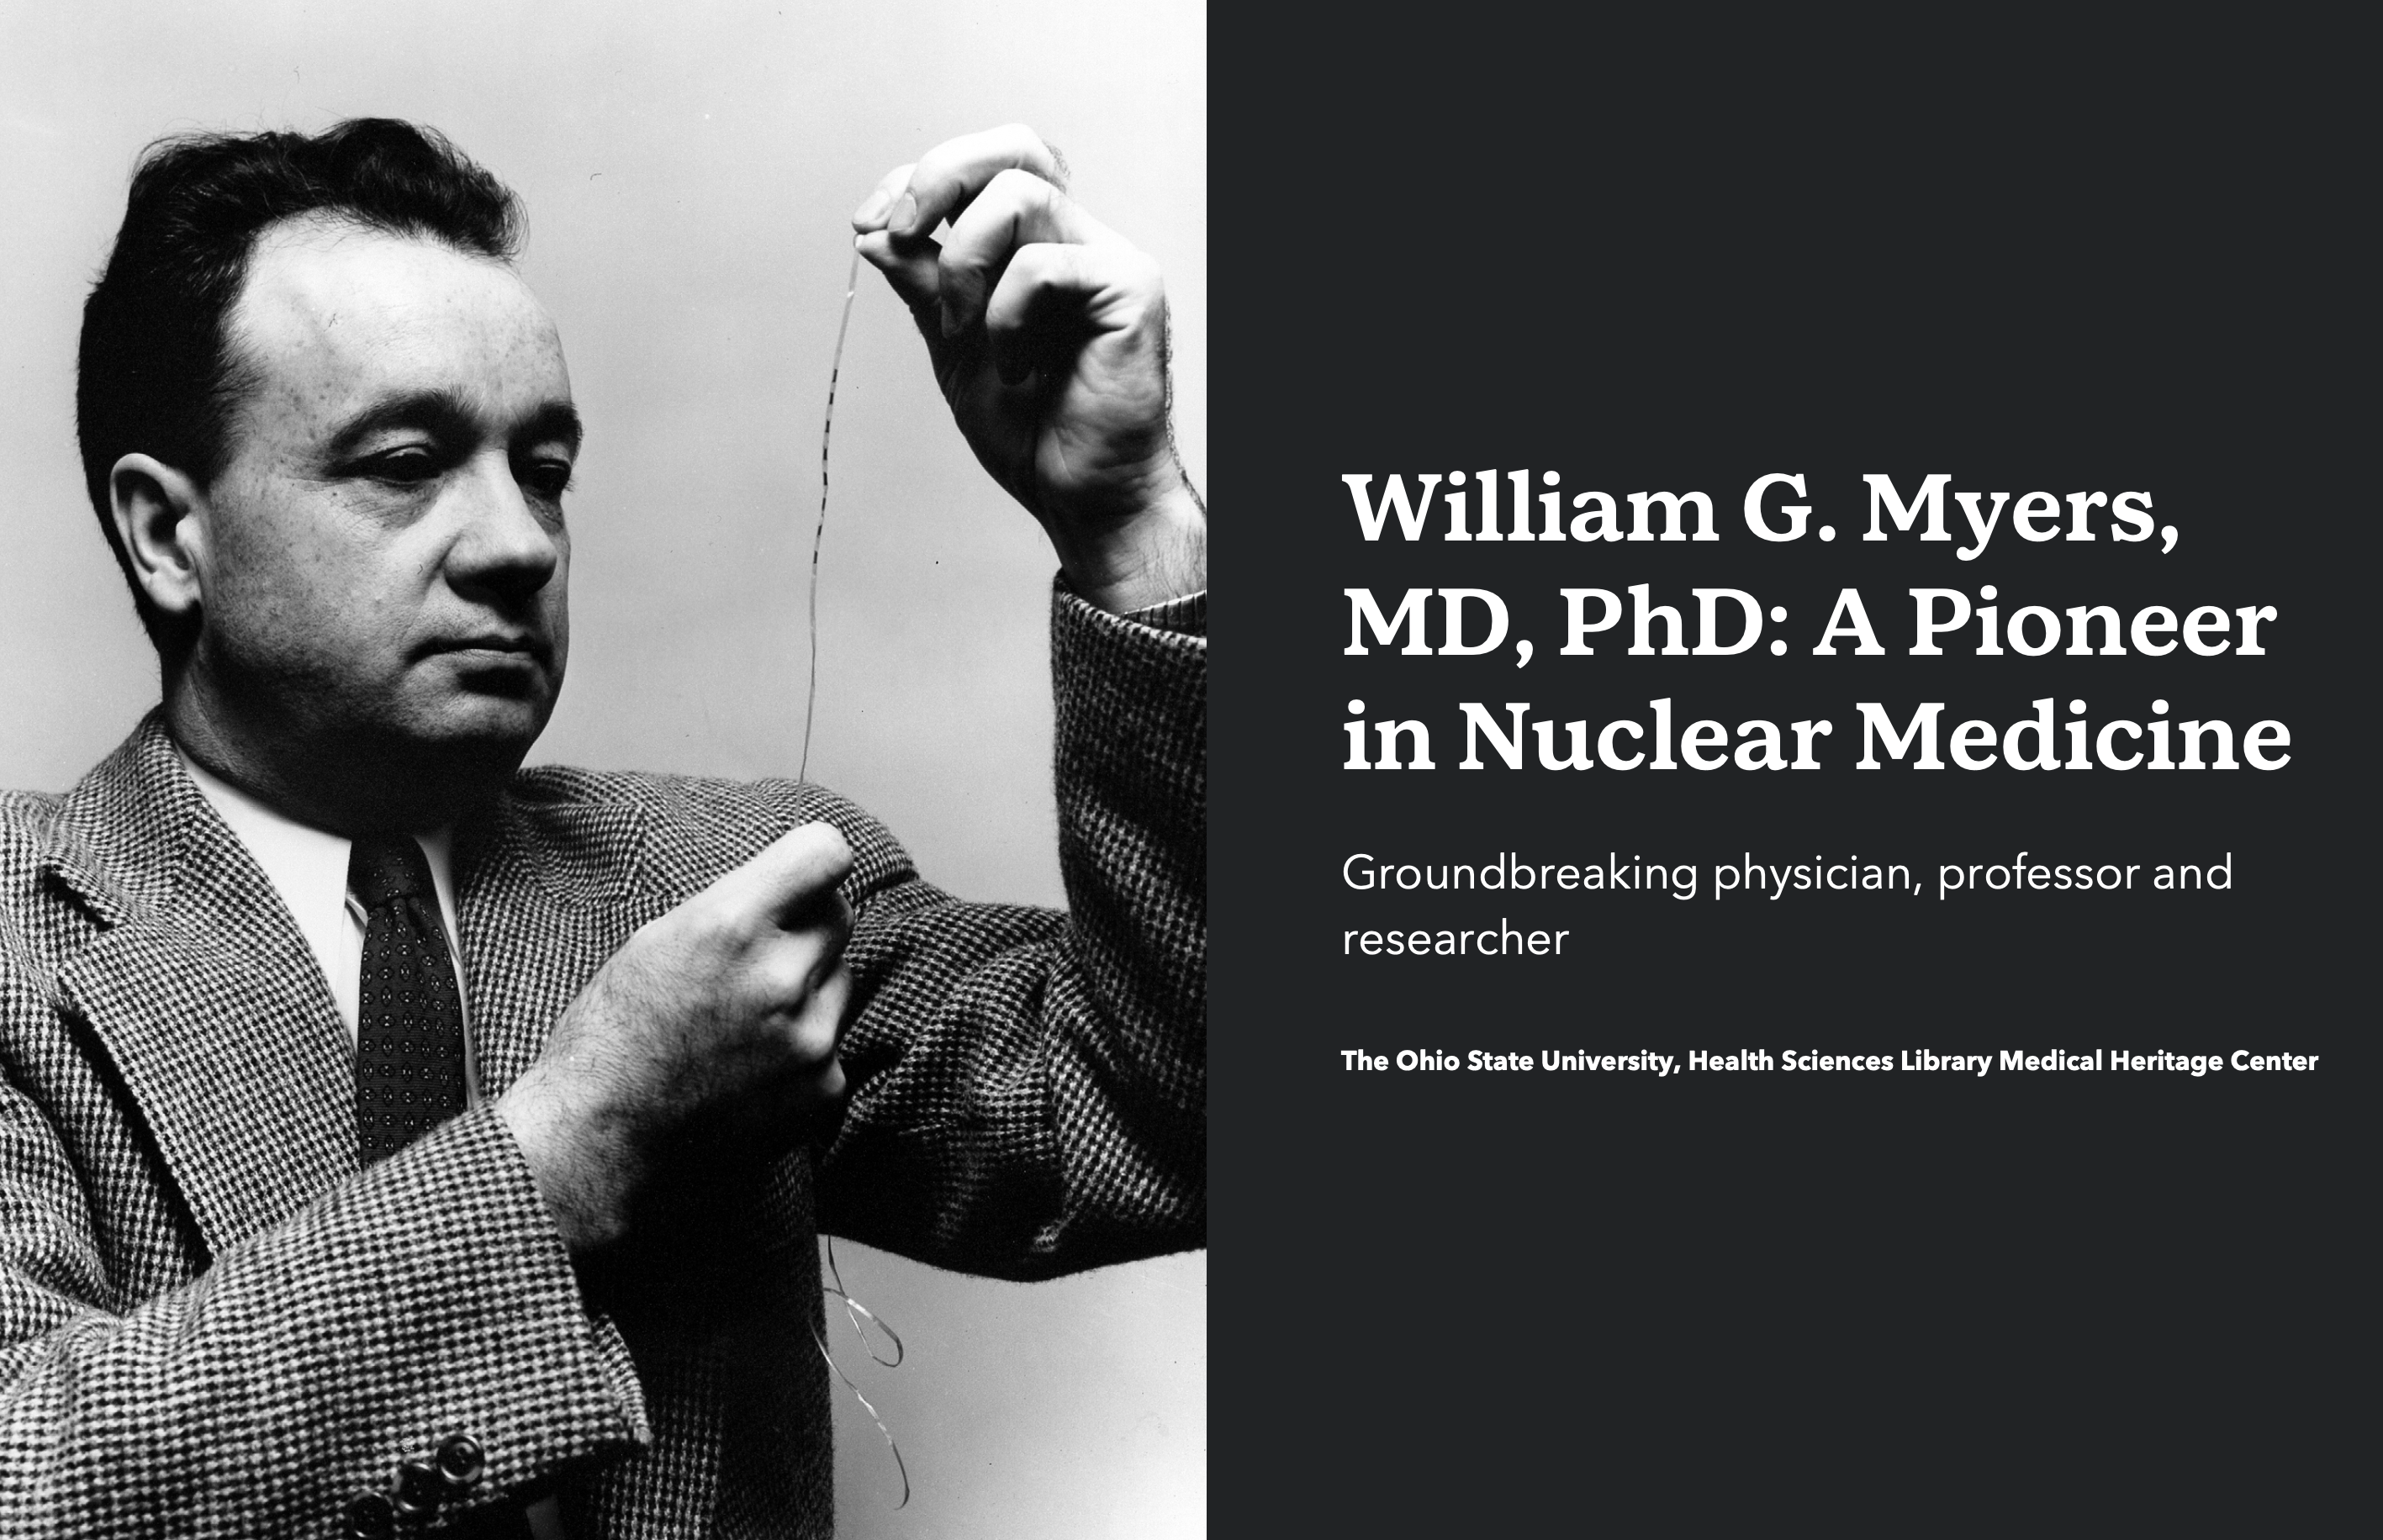 William G. Myers digital exhibit: A Pioneer in Nuclear Medicine. Click the image to view the exhibit webpage.